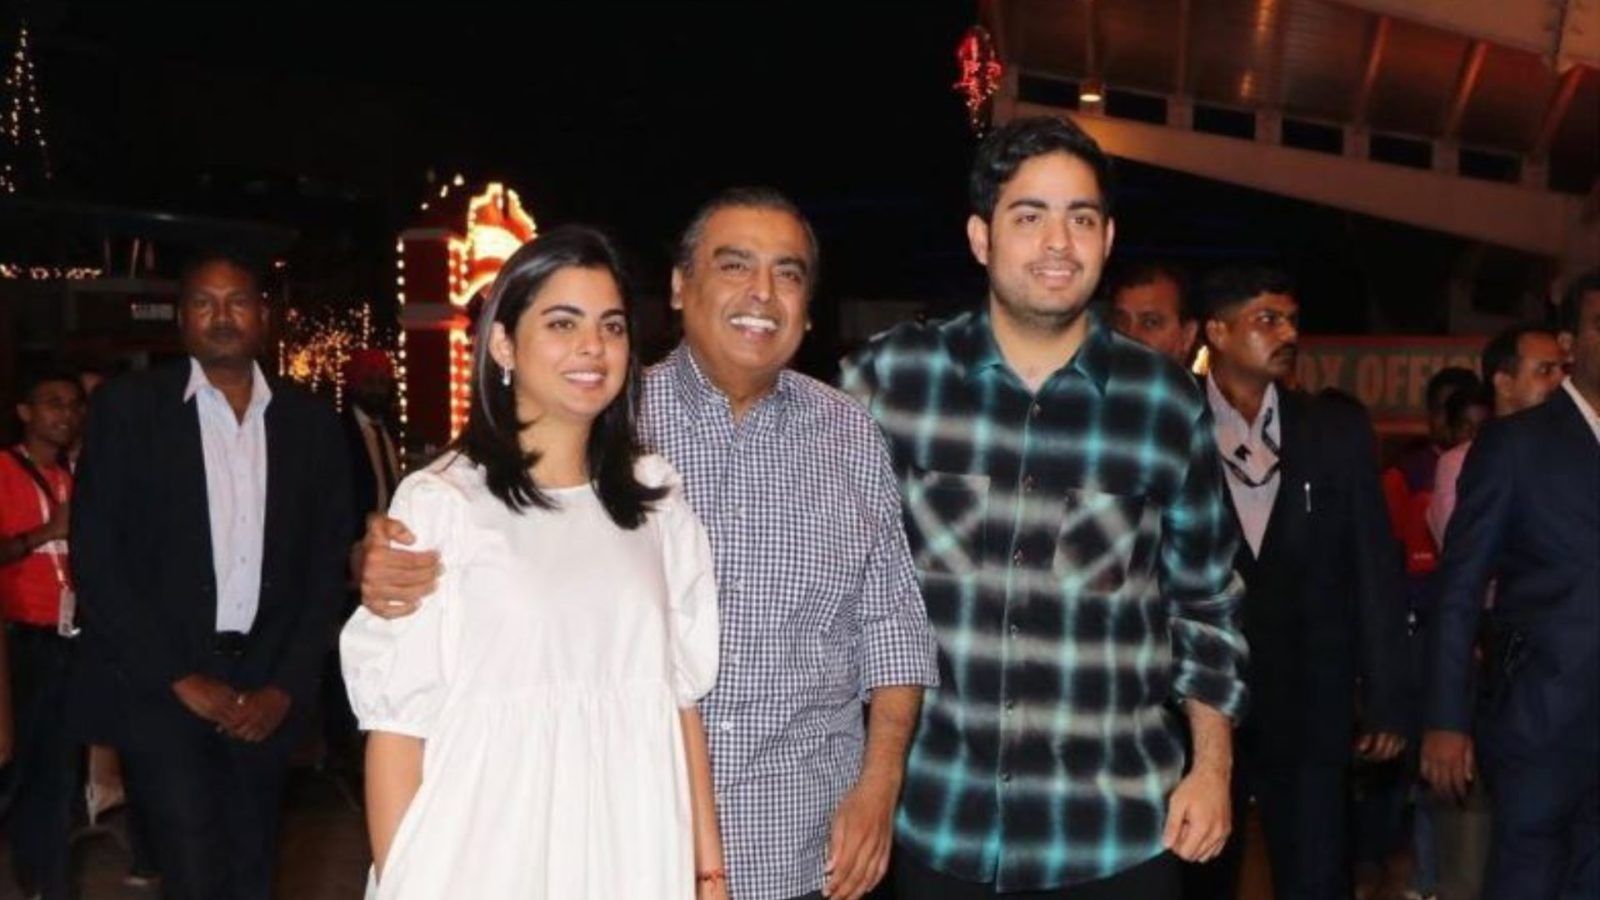 All you need to know about Isha Ambani and her luxurious lifestyle